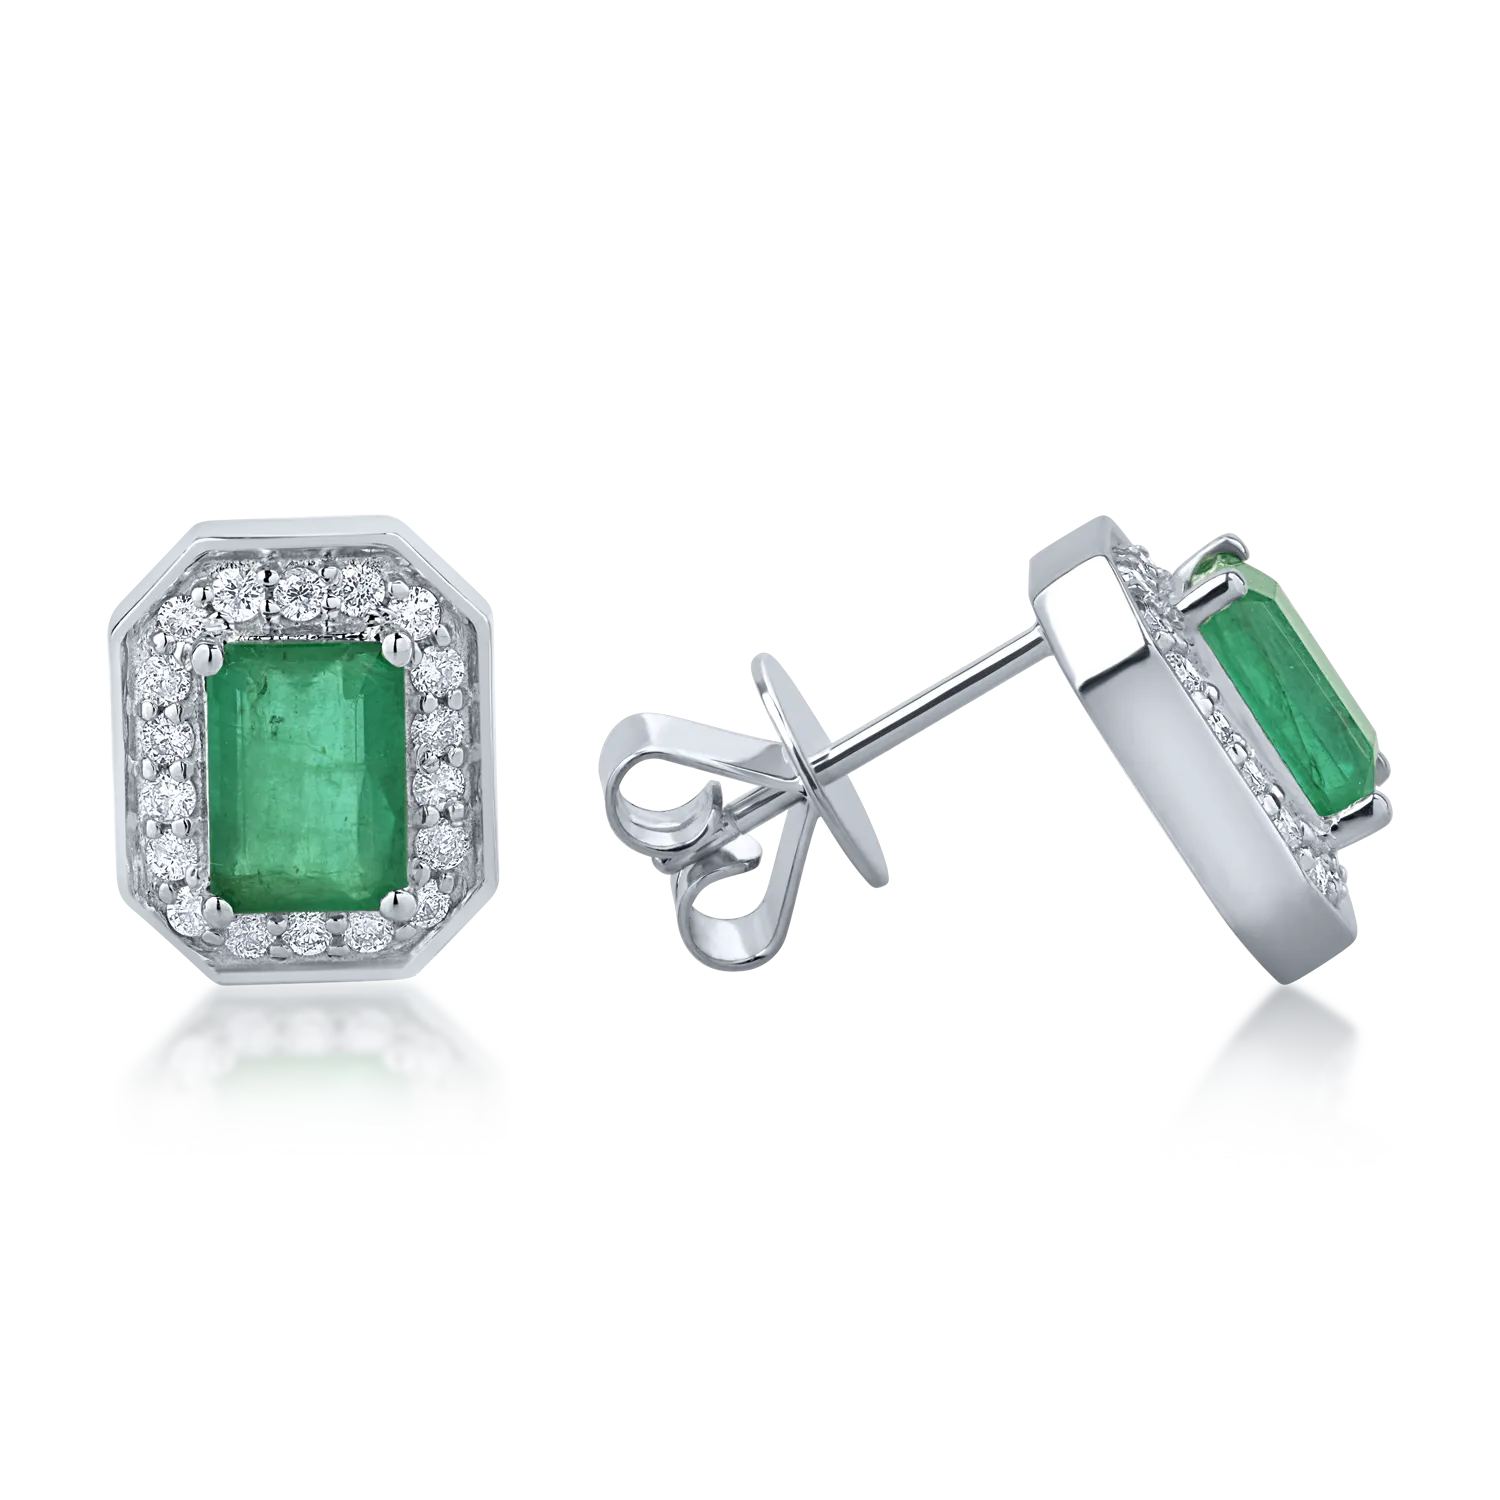 White gold earrings with 1.91ct emeralds and 0.39ct diamonds